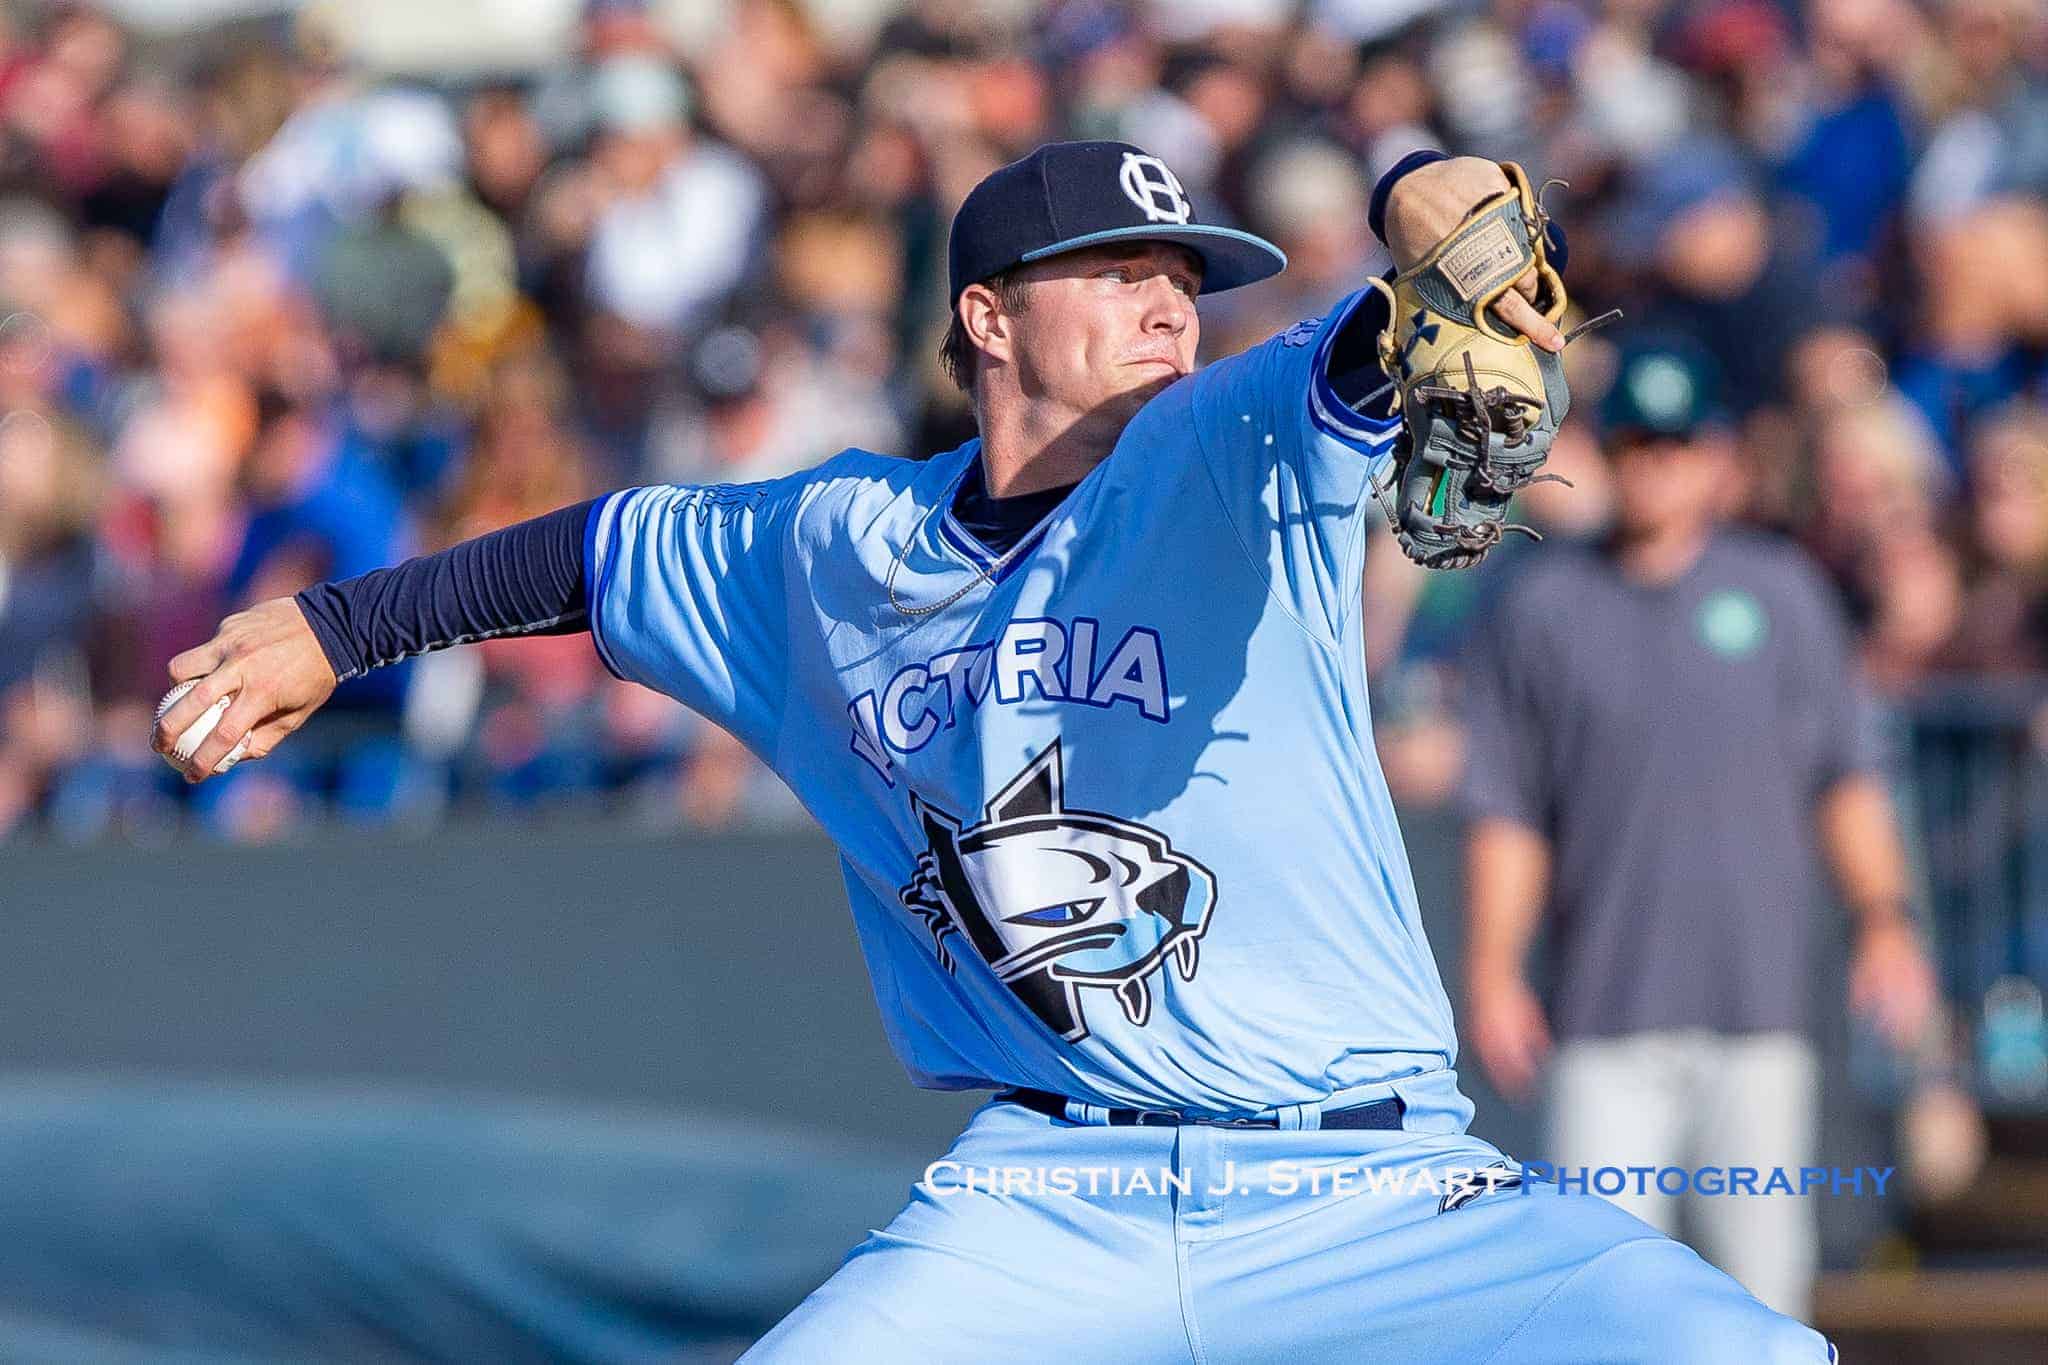 Hawkins propels HarbourCats to series-clinching victory over Pippins